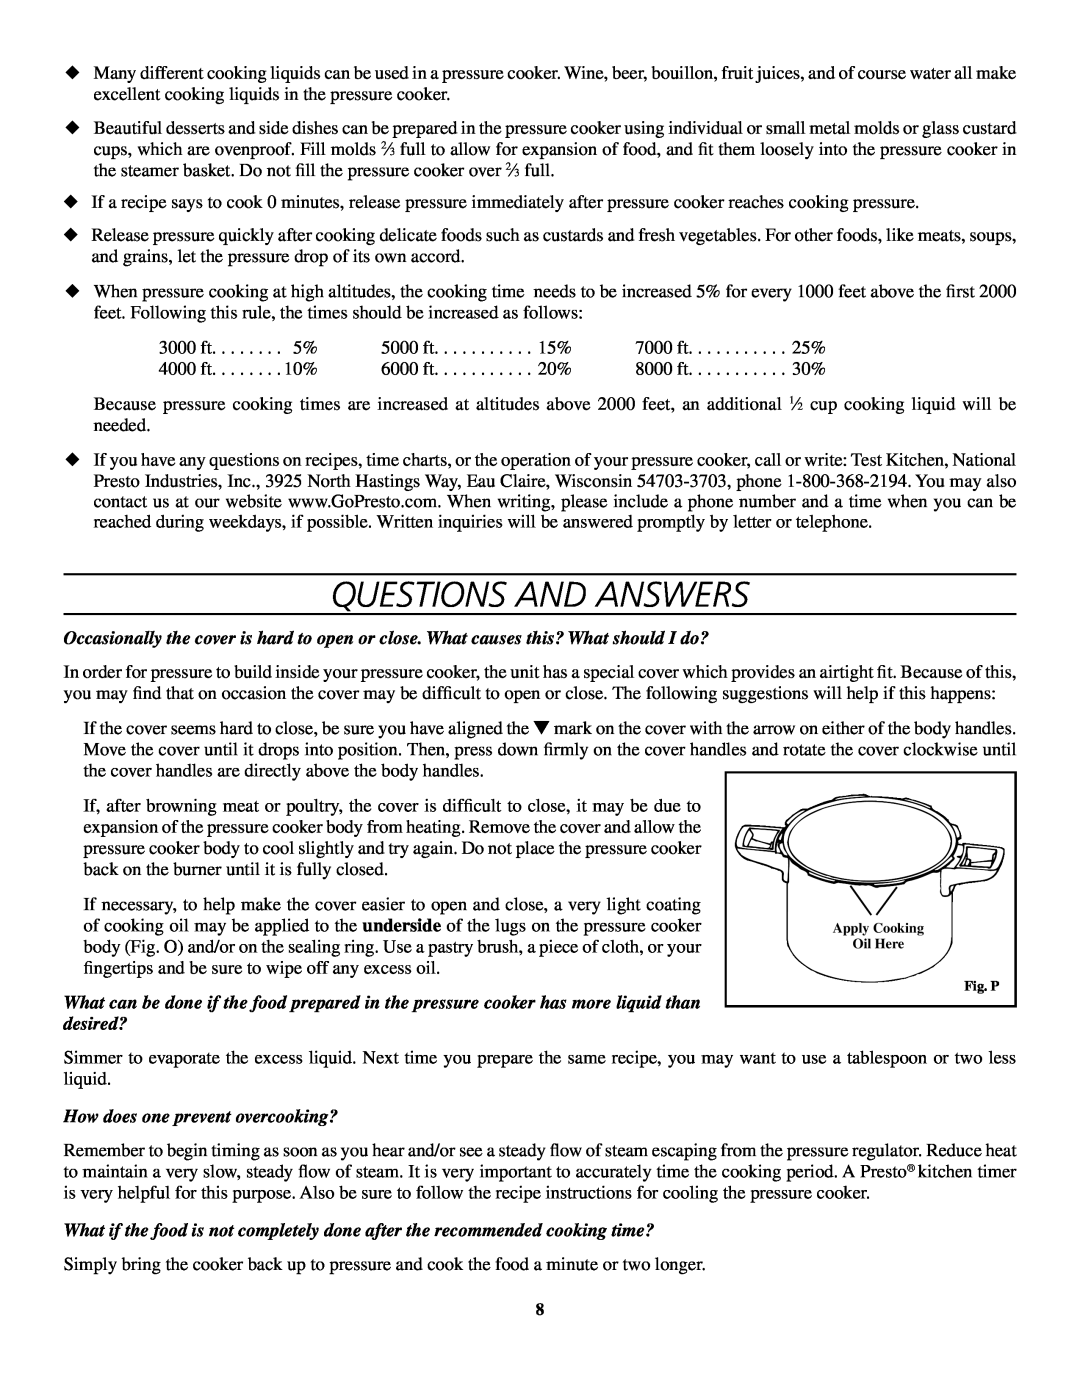 Presto 8-Quart Stainless Steel Pressure Cooker and Canner warranty Questions AND Answers, How does one prevent overcooking? 